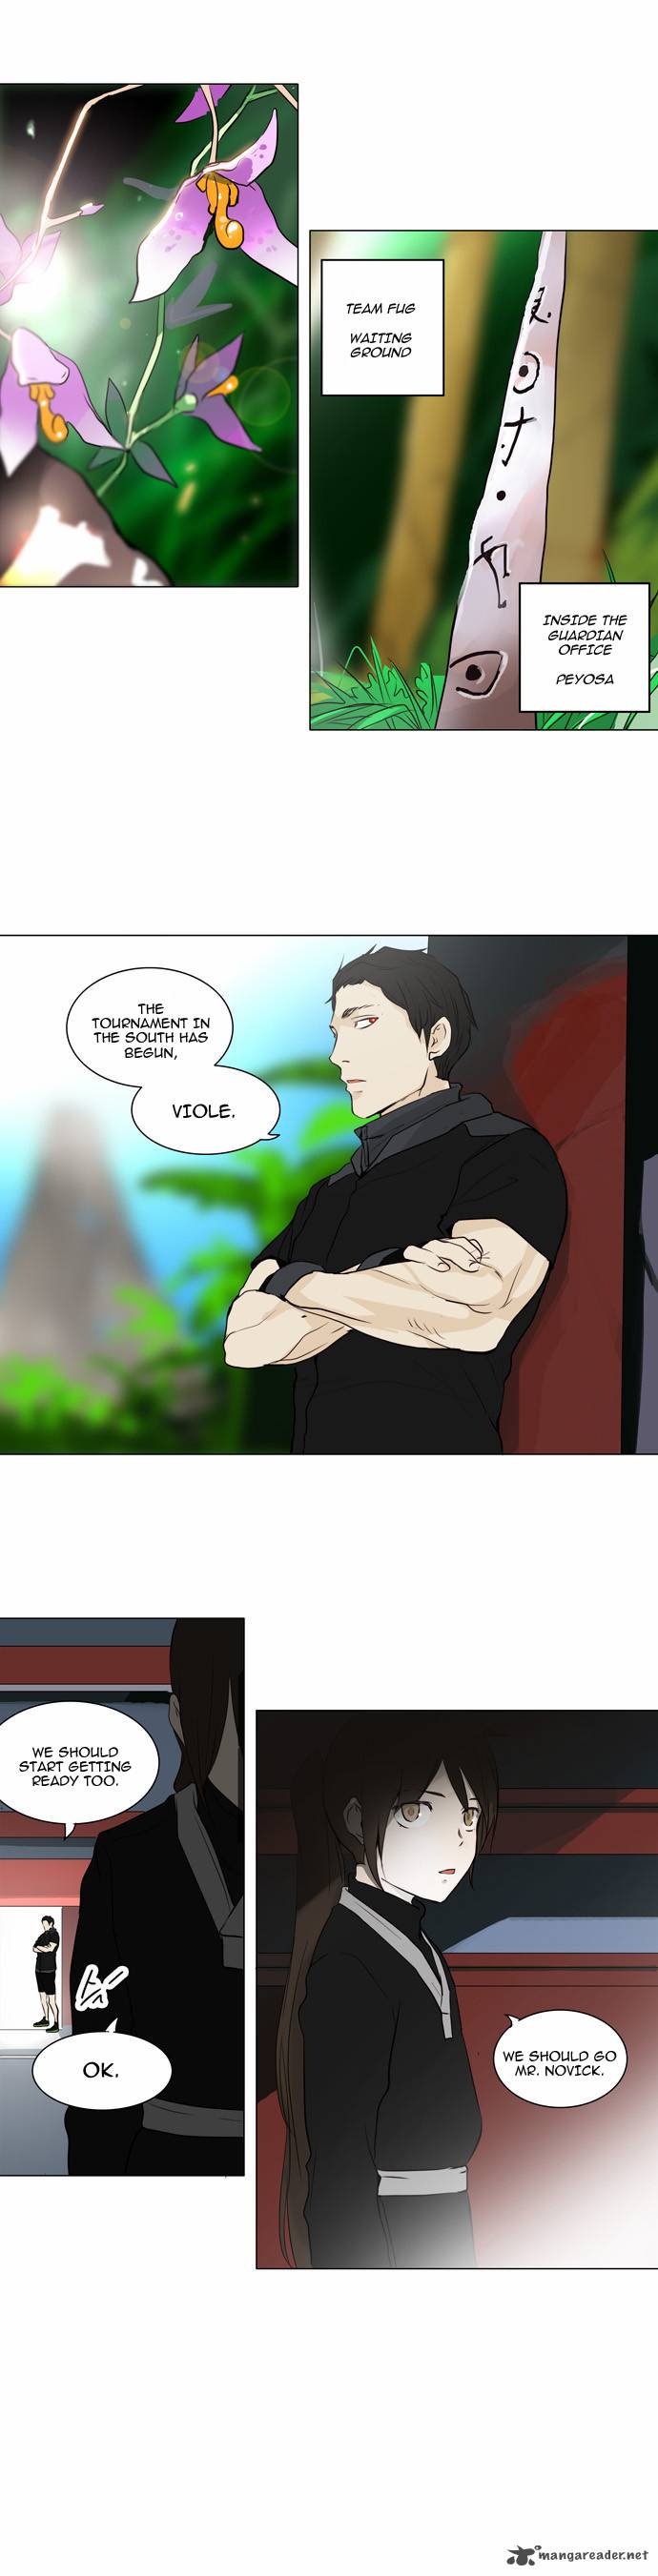 Tower Of God 161 26